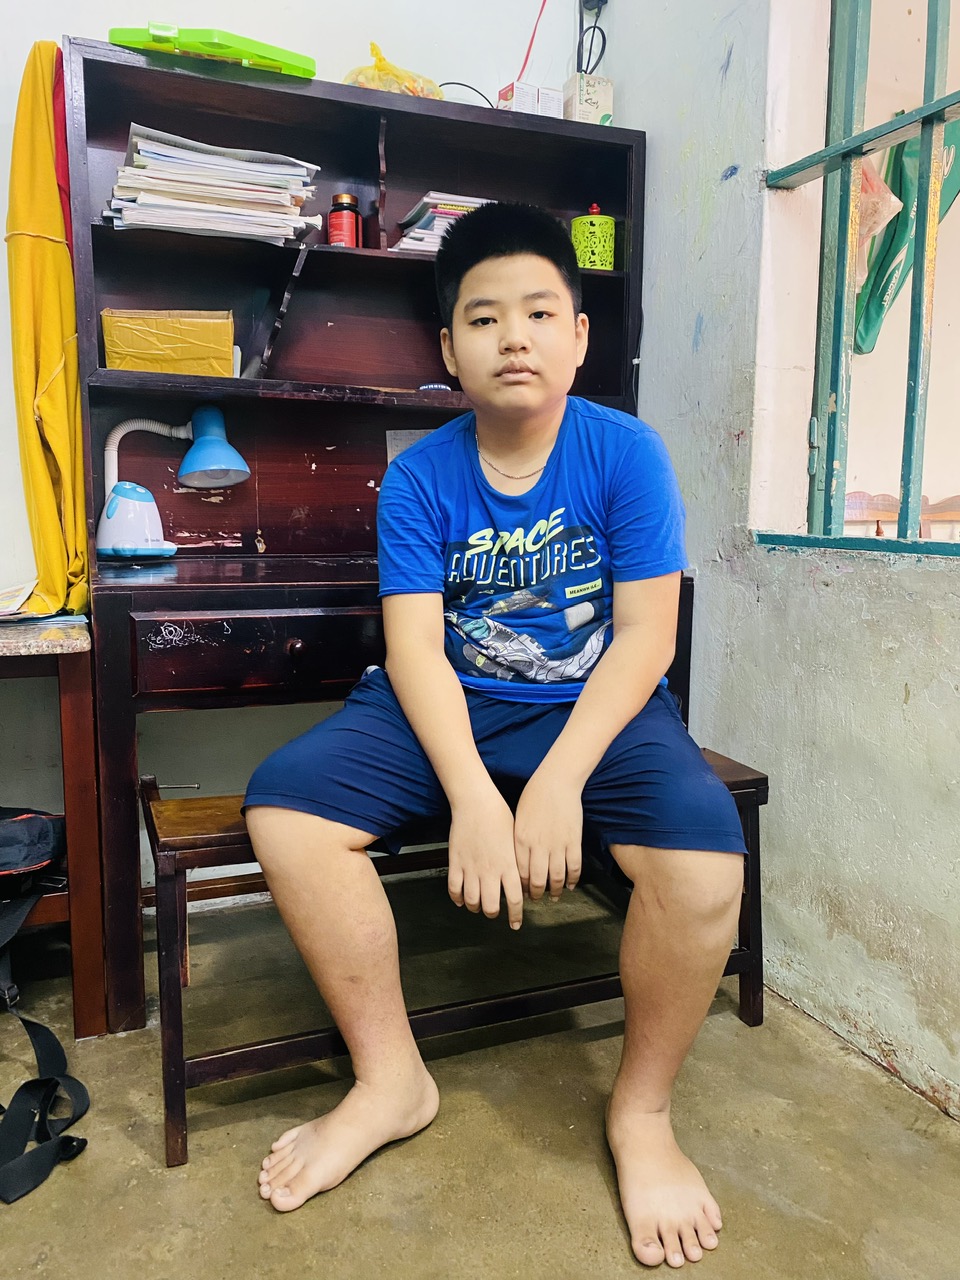 Ho Quang Truong is in need of help

